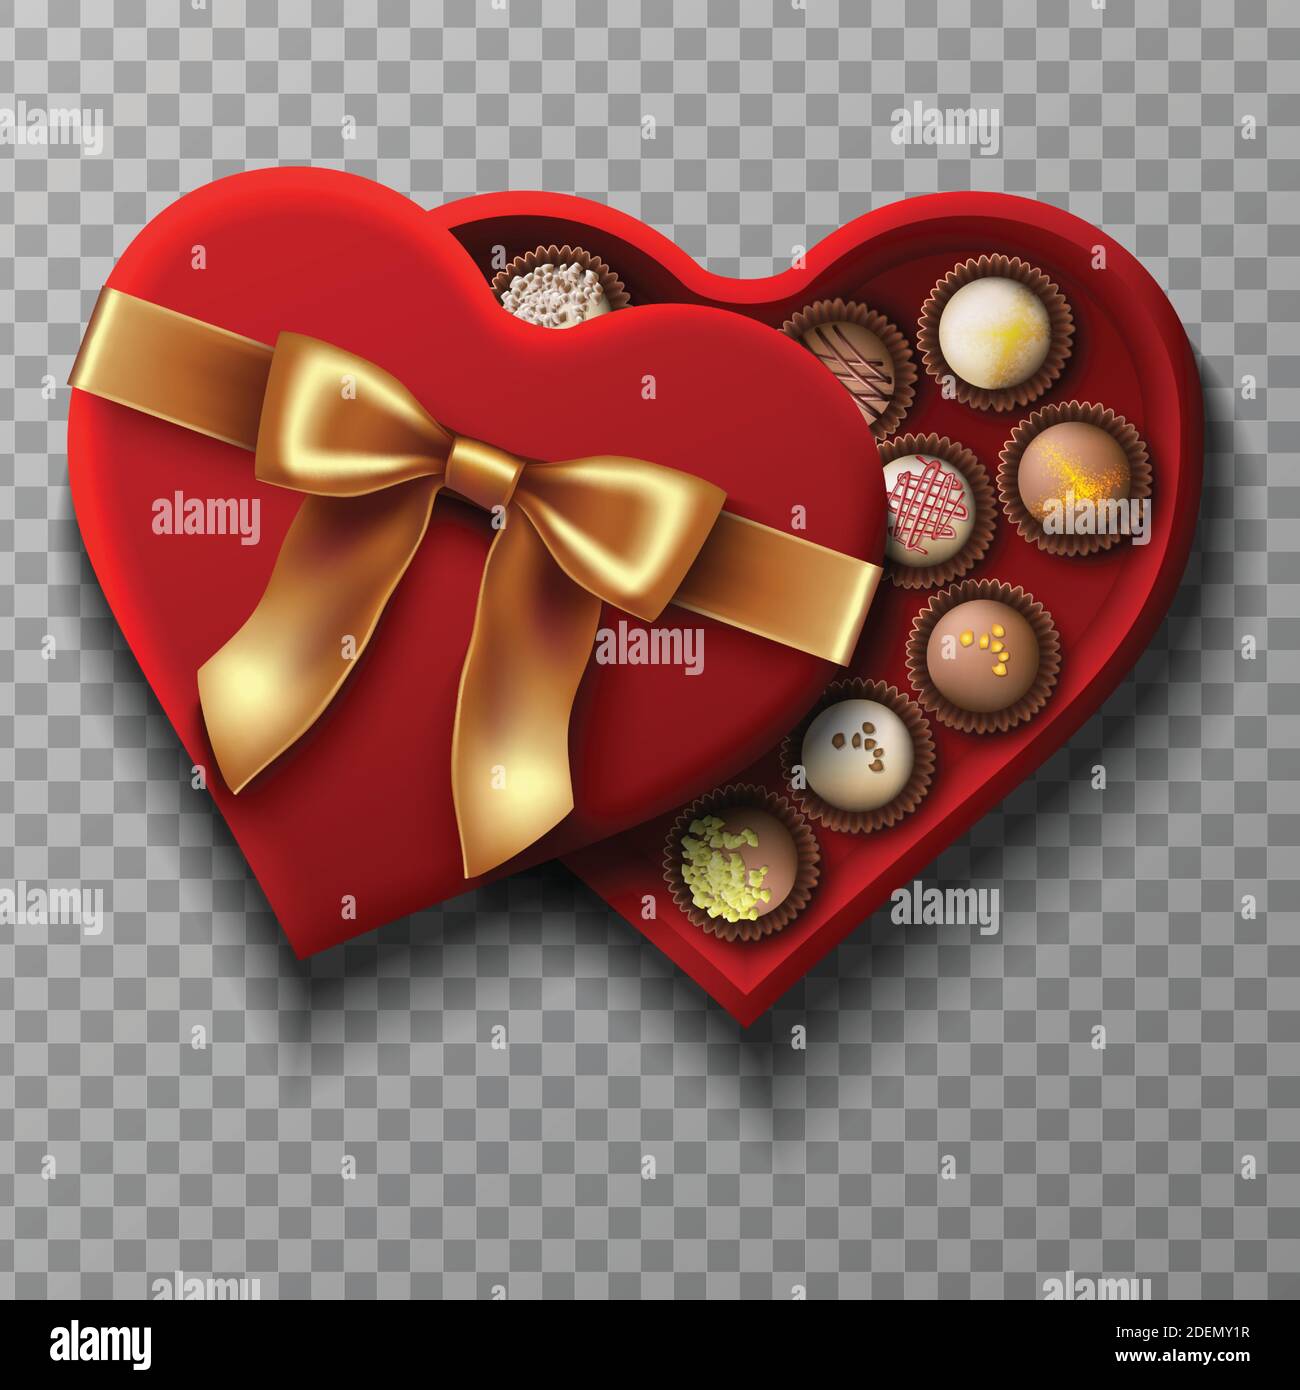 3d realistic vector red velvet candy open box with golden bow in heart shape with collection of different chocolate candies in dark and white chocolat Stock Vector